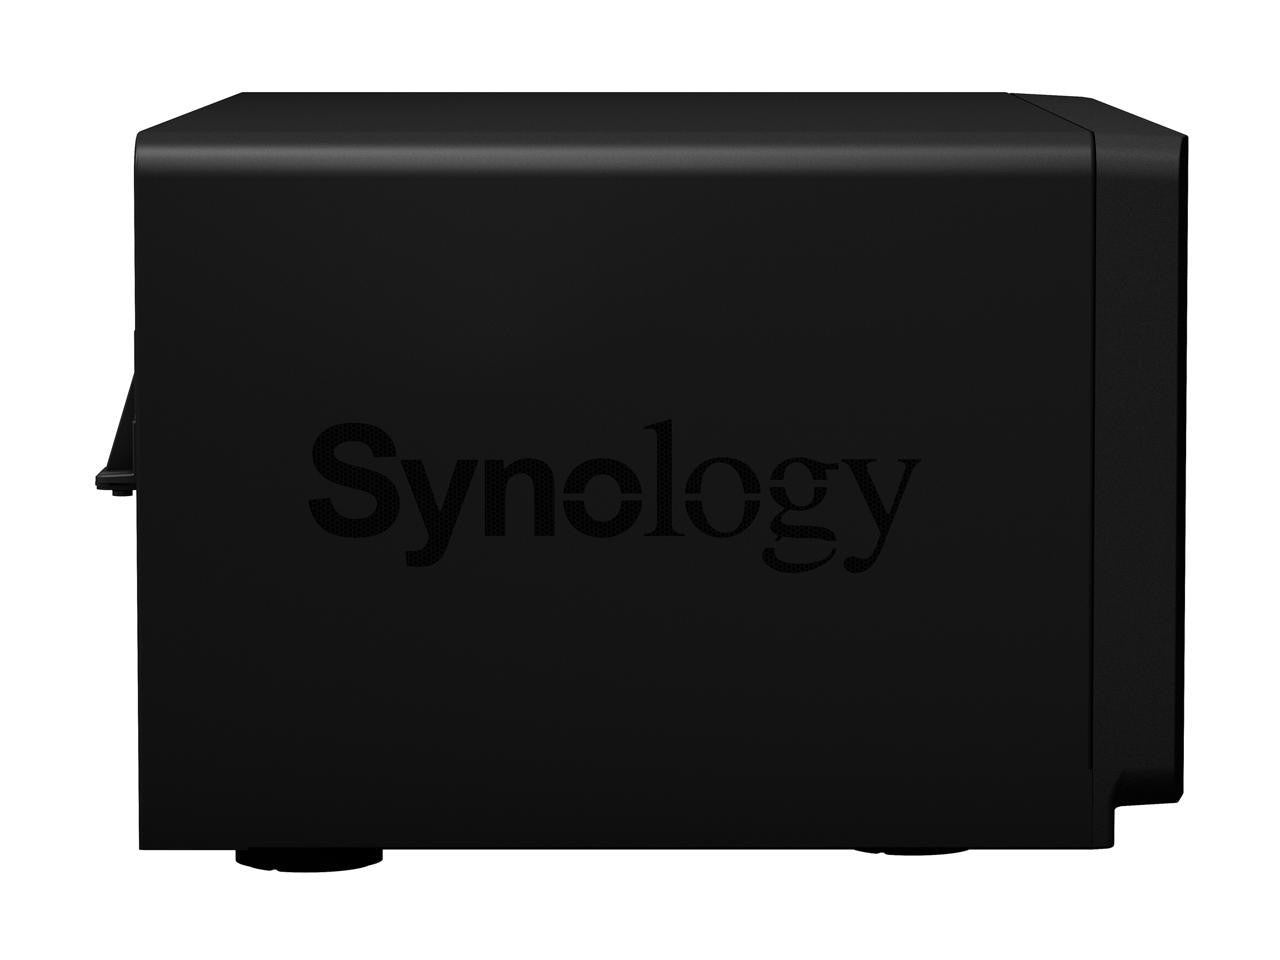 Synology DS1821+ 8-BAY DiskStation with 32GB RAM, 800GB (2x400GB) Cache and 64TB (8 x 8TB) of Synology Enterprise HAT5300 Drives Fully Assembled and Tested By CustomTechSales